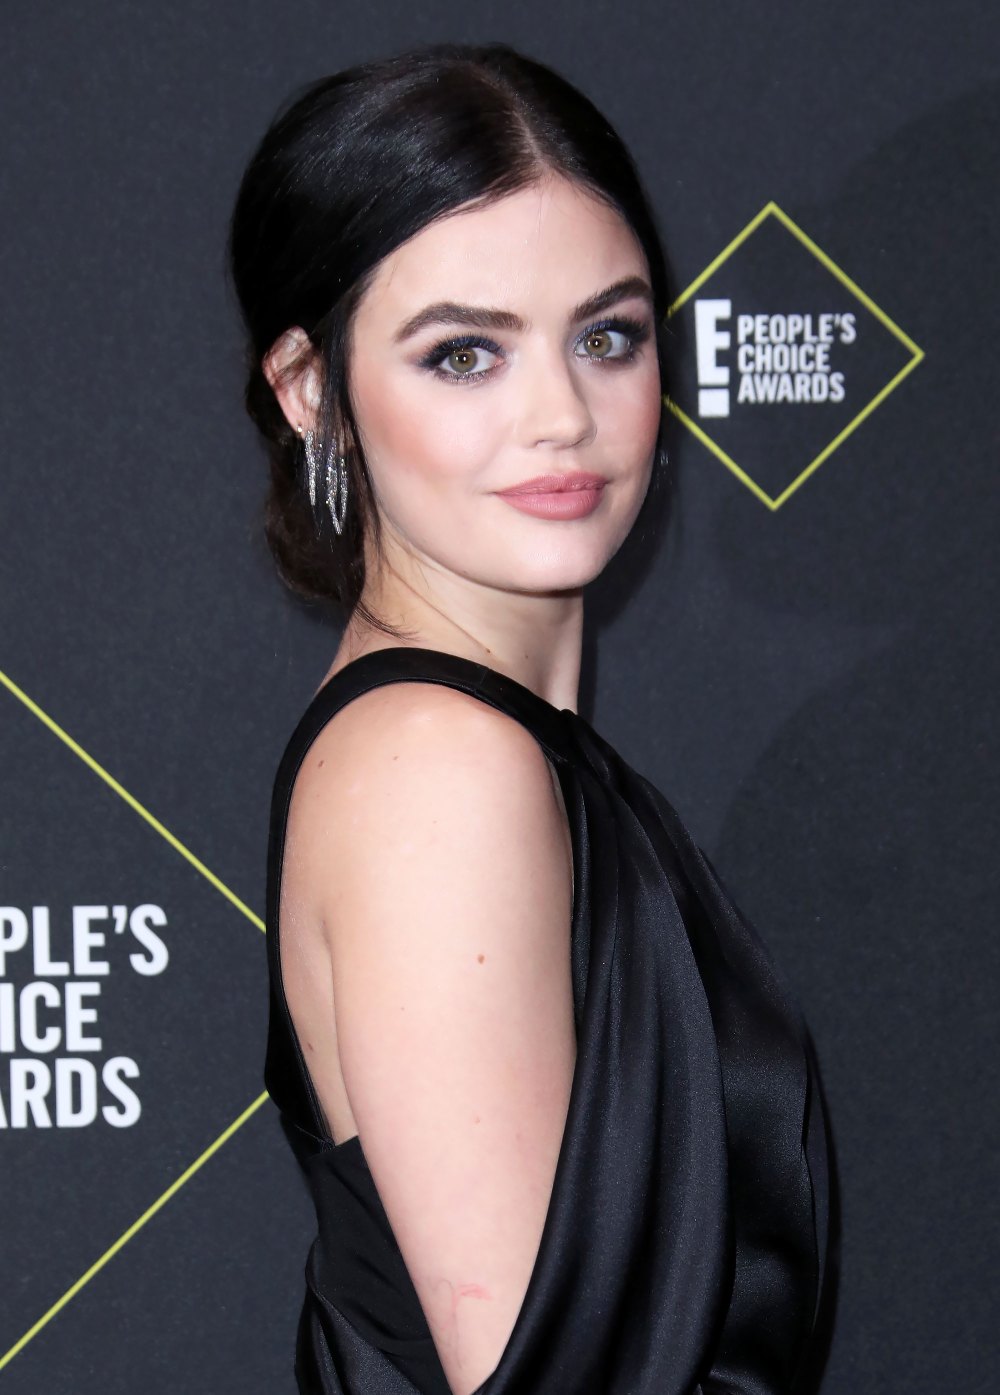 Lucy Hale Is the Newest Almay Brand Ambassador